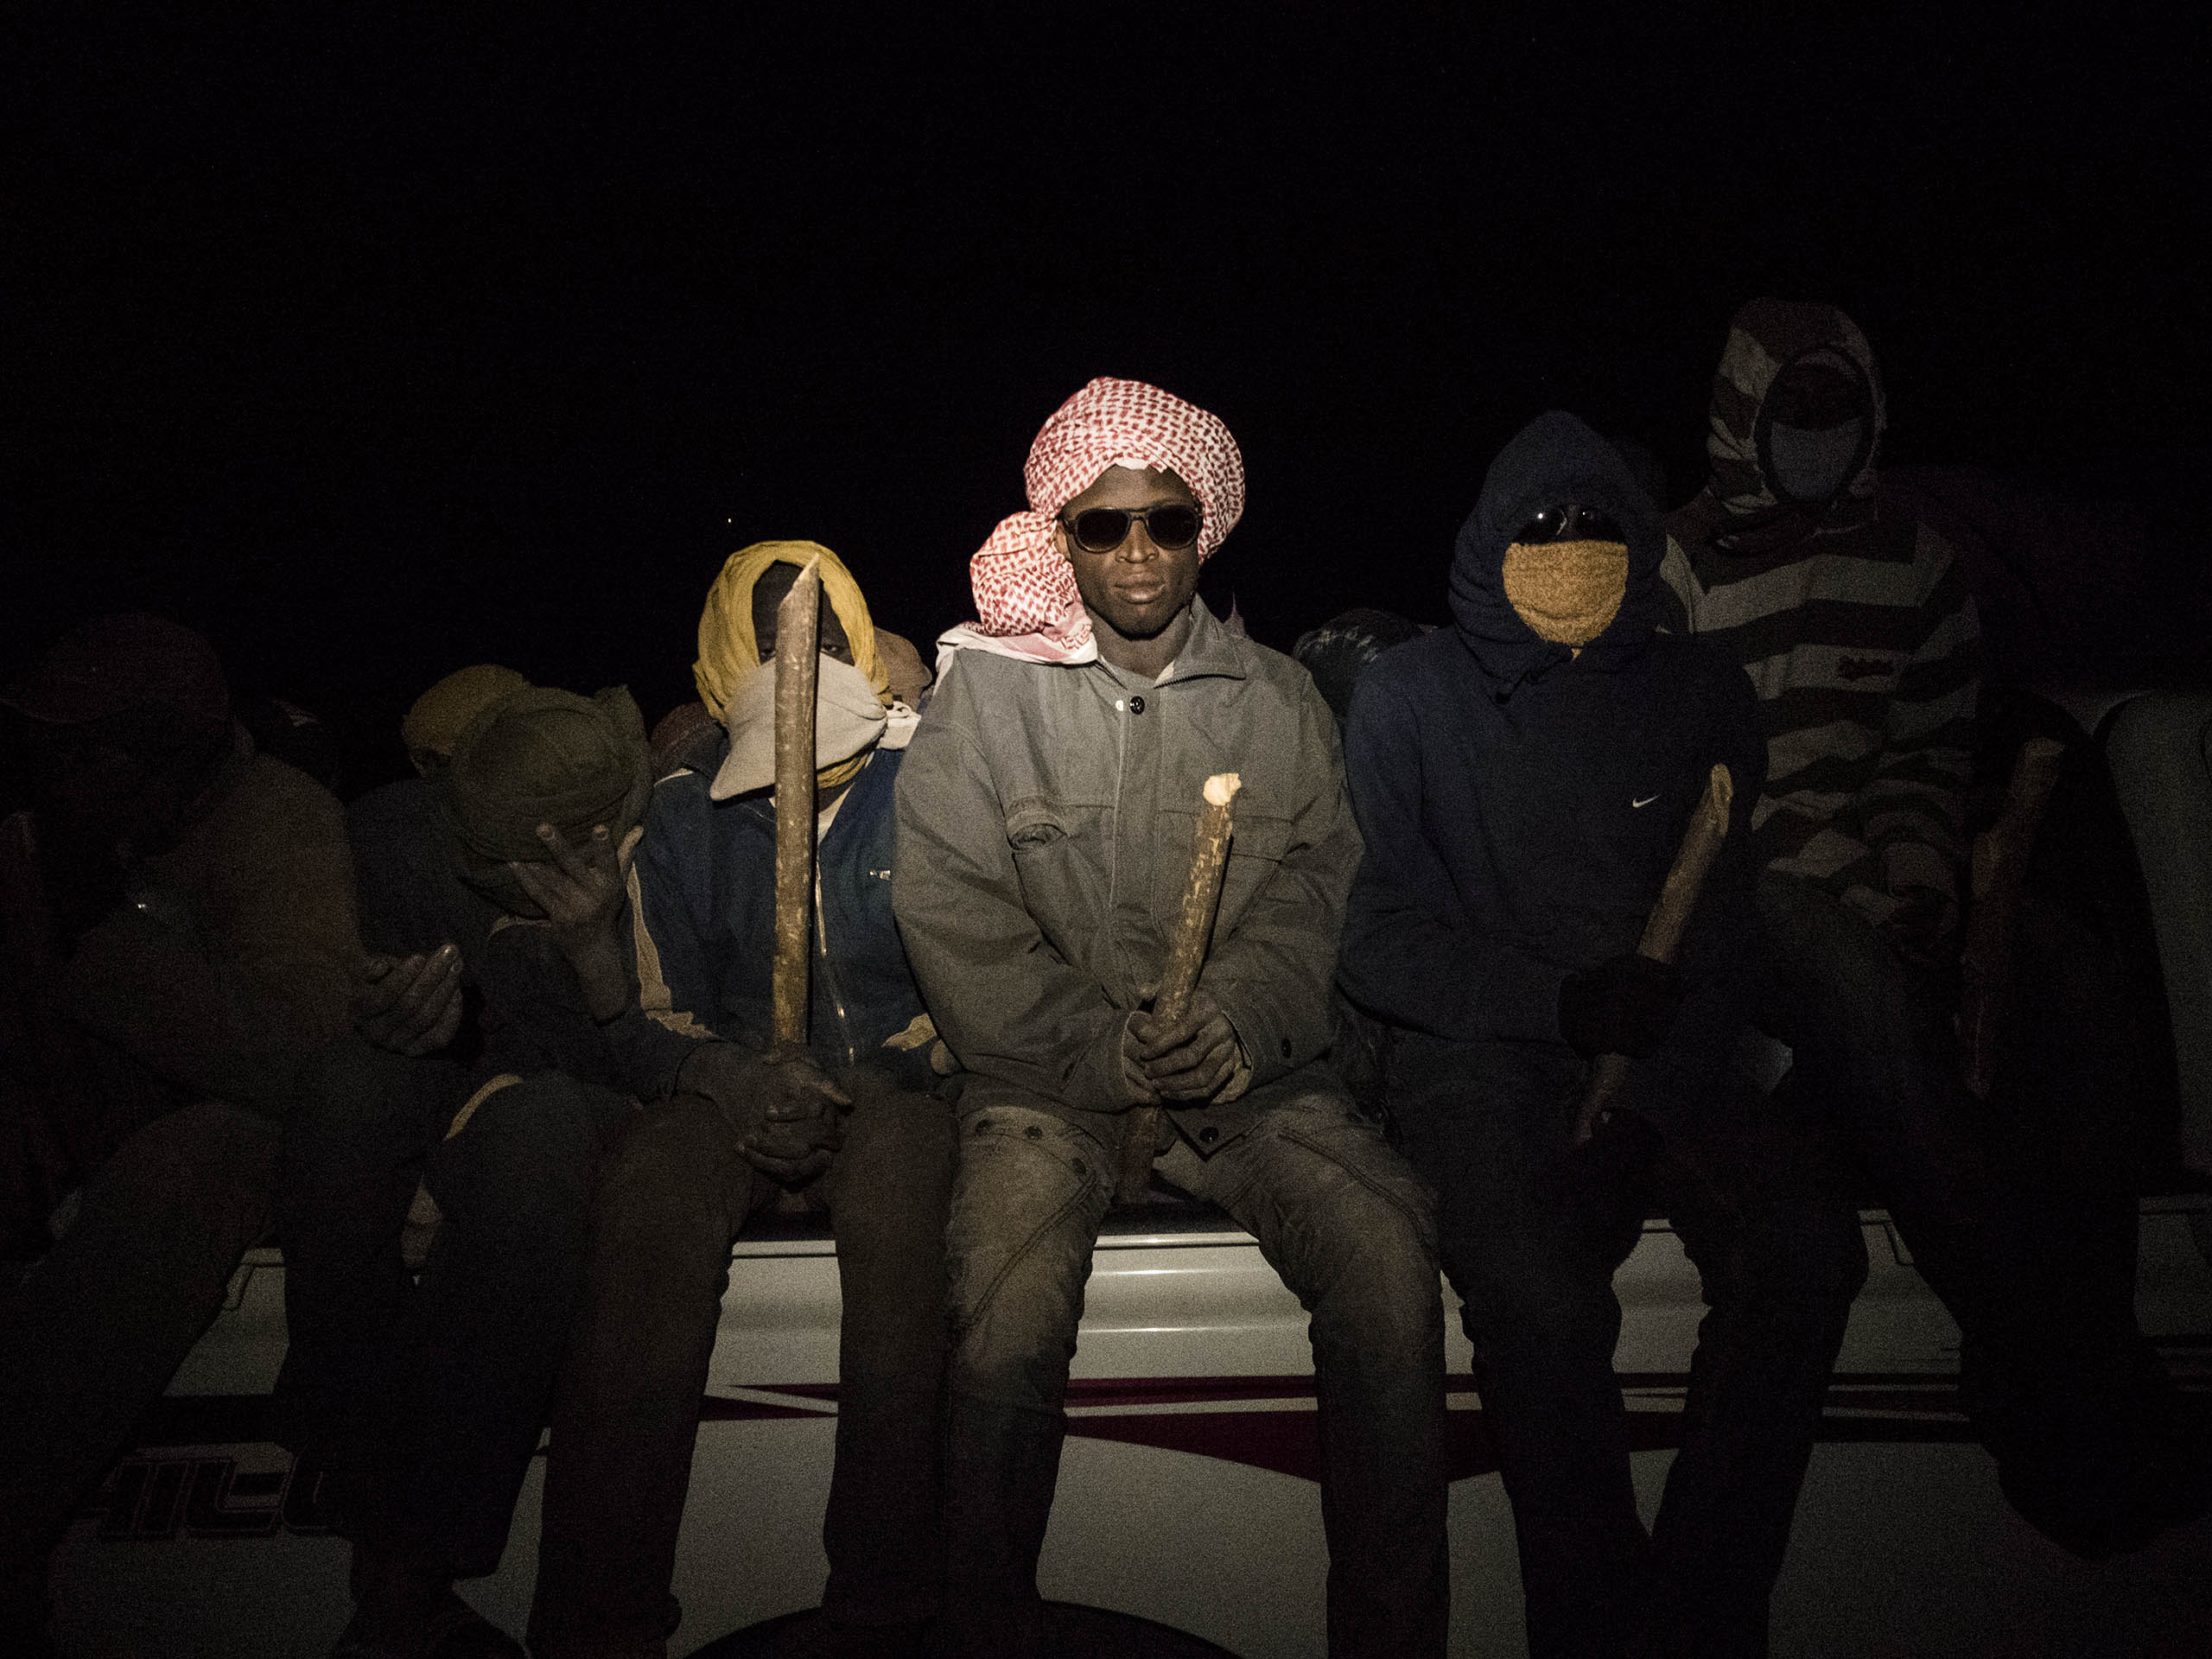 A group of migrants from West African countries near the border with Niger. They are on the road to Tripoli, where they will likely try to continue on to Europe.
                              One of the main source of income in Tebu controlled areas remains illegal immigration.